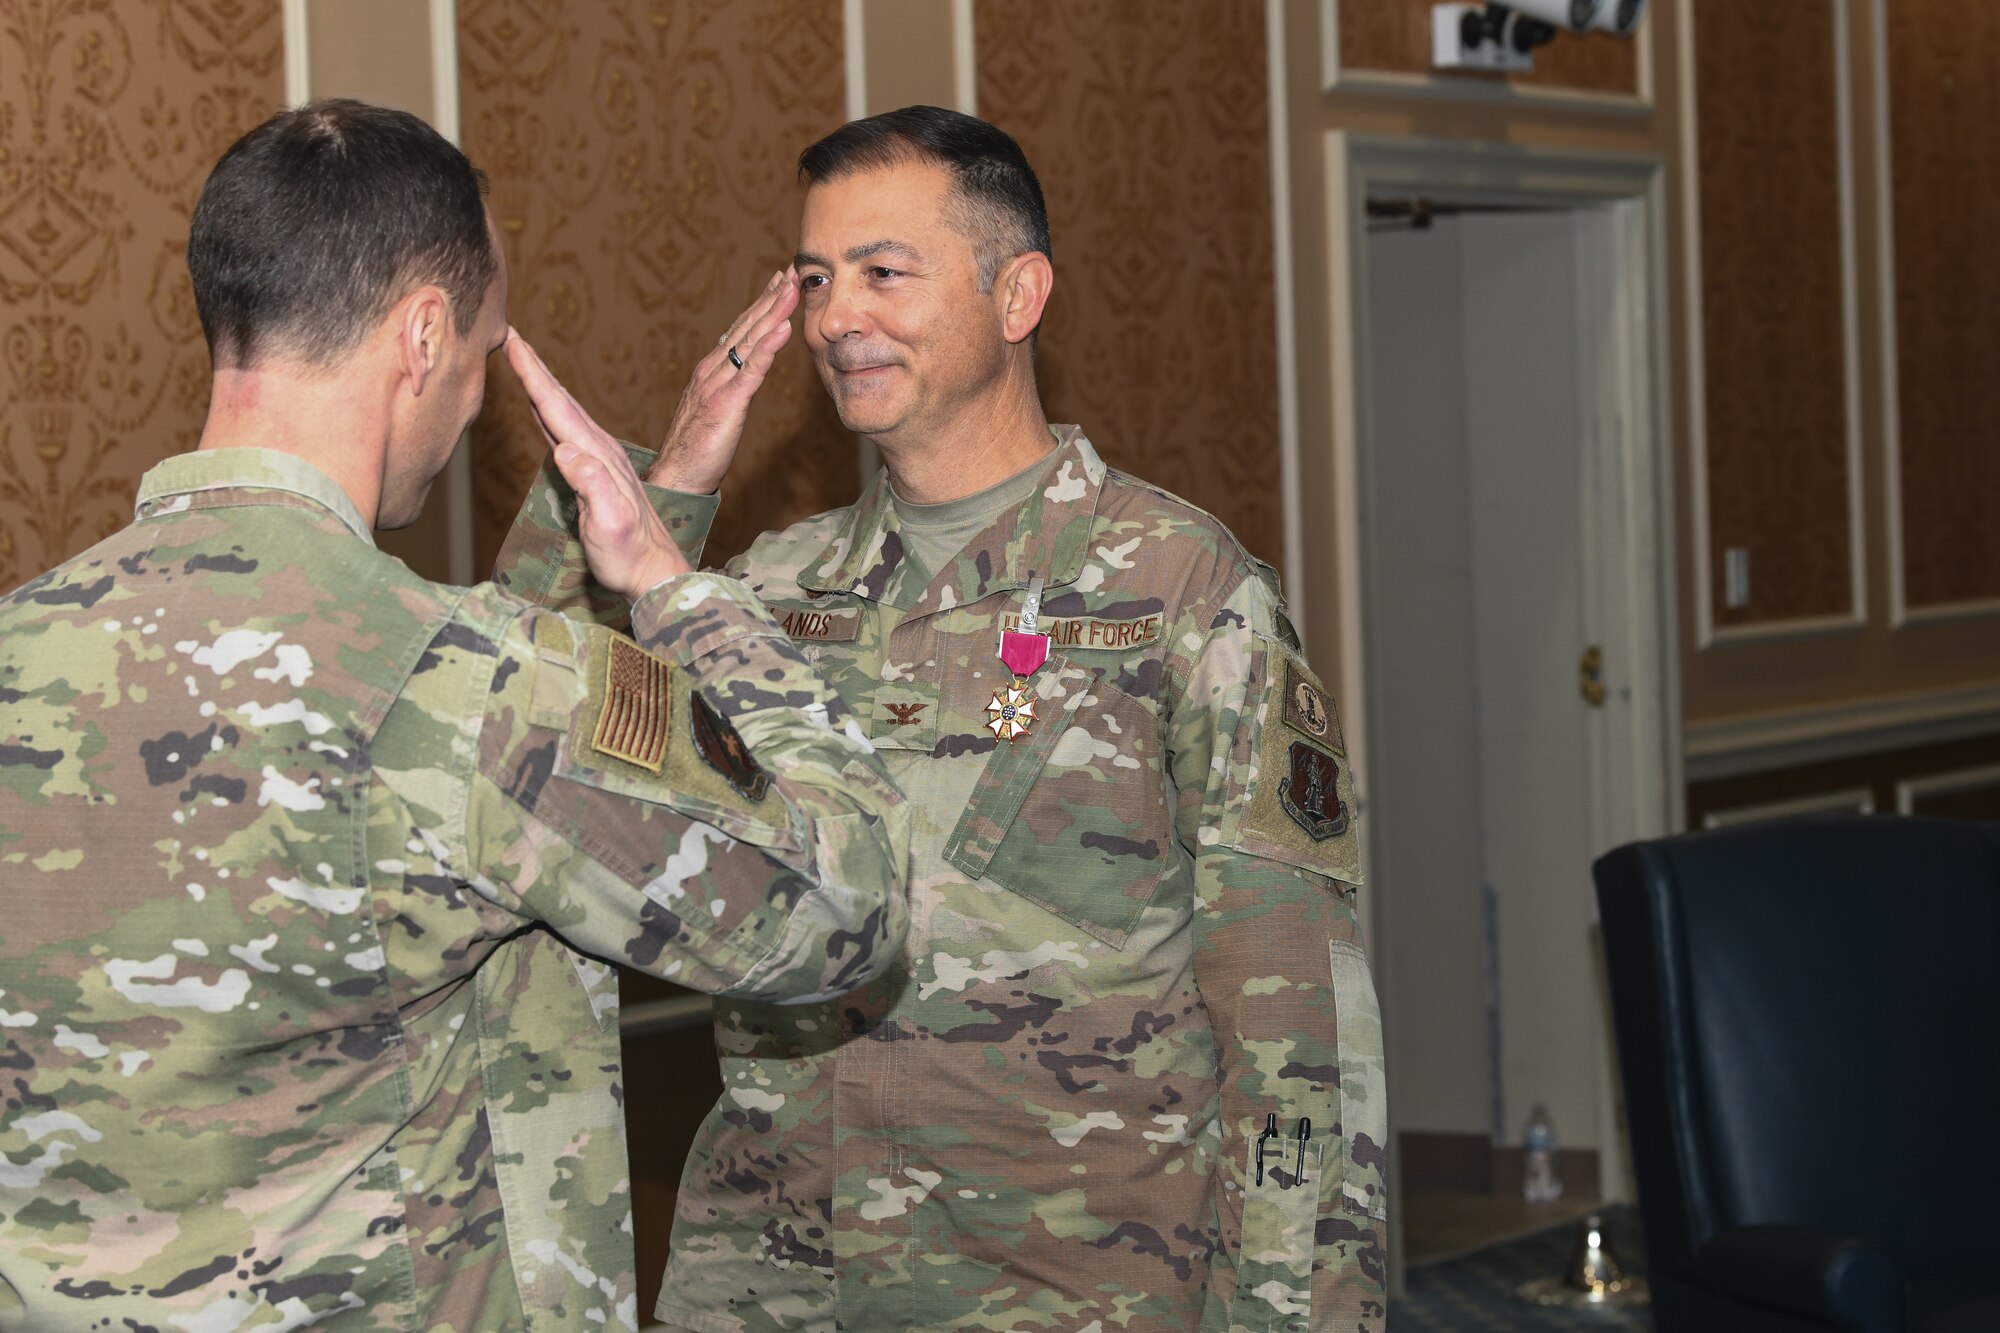 Two military members saluting each other.